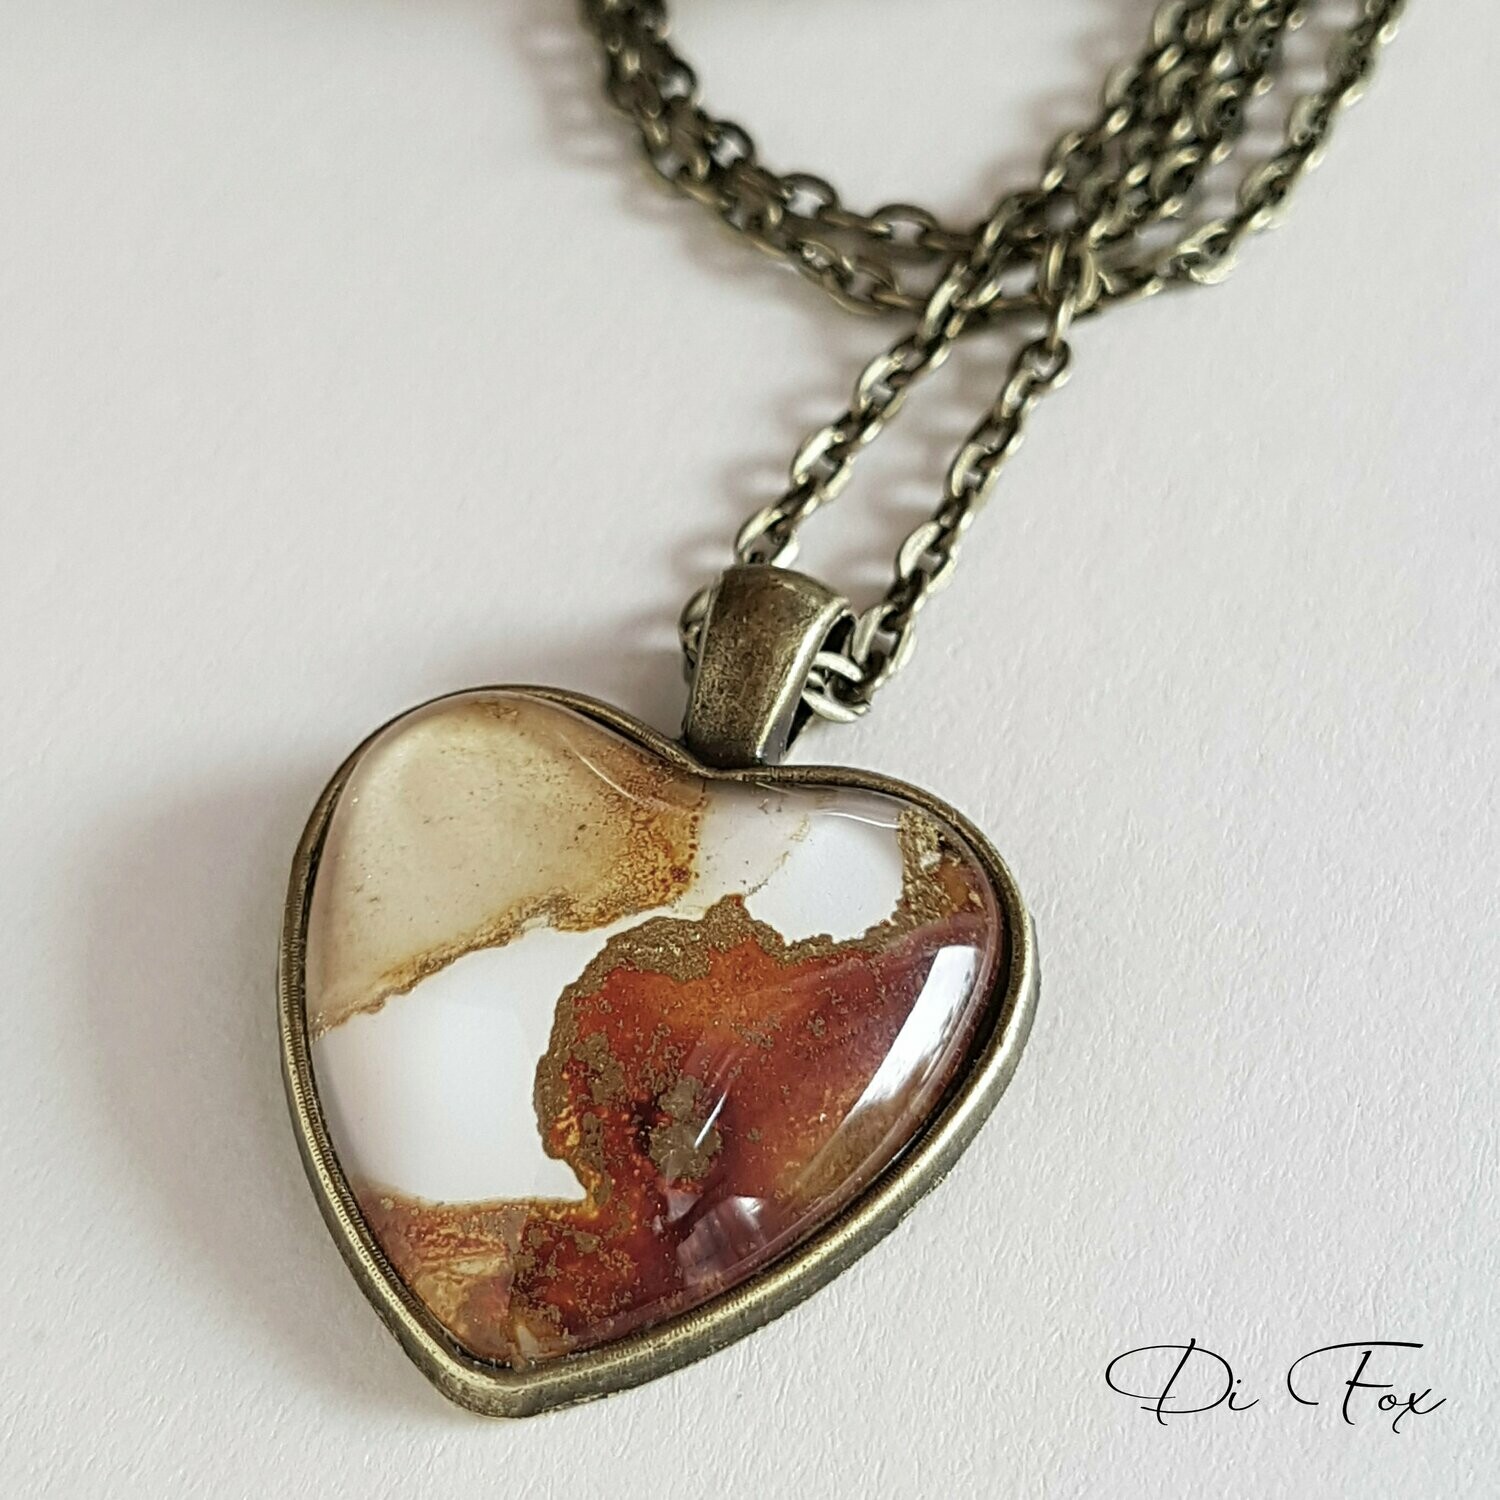 Caramel, Toffee, White and Gold heart shape Bronze pendant and chain.